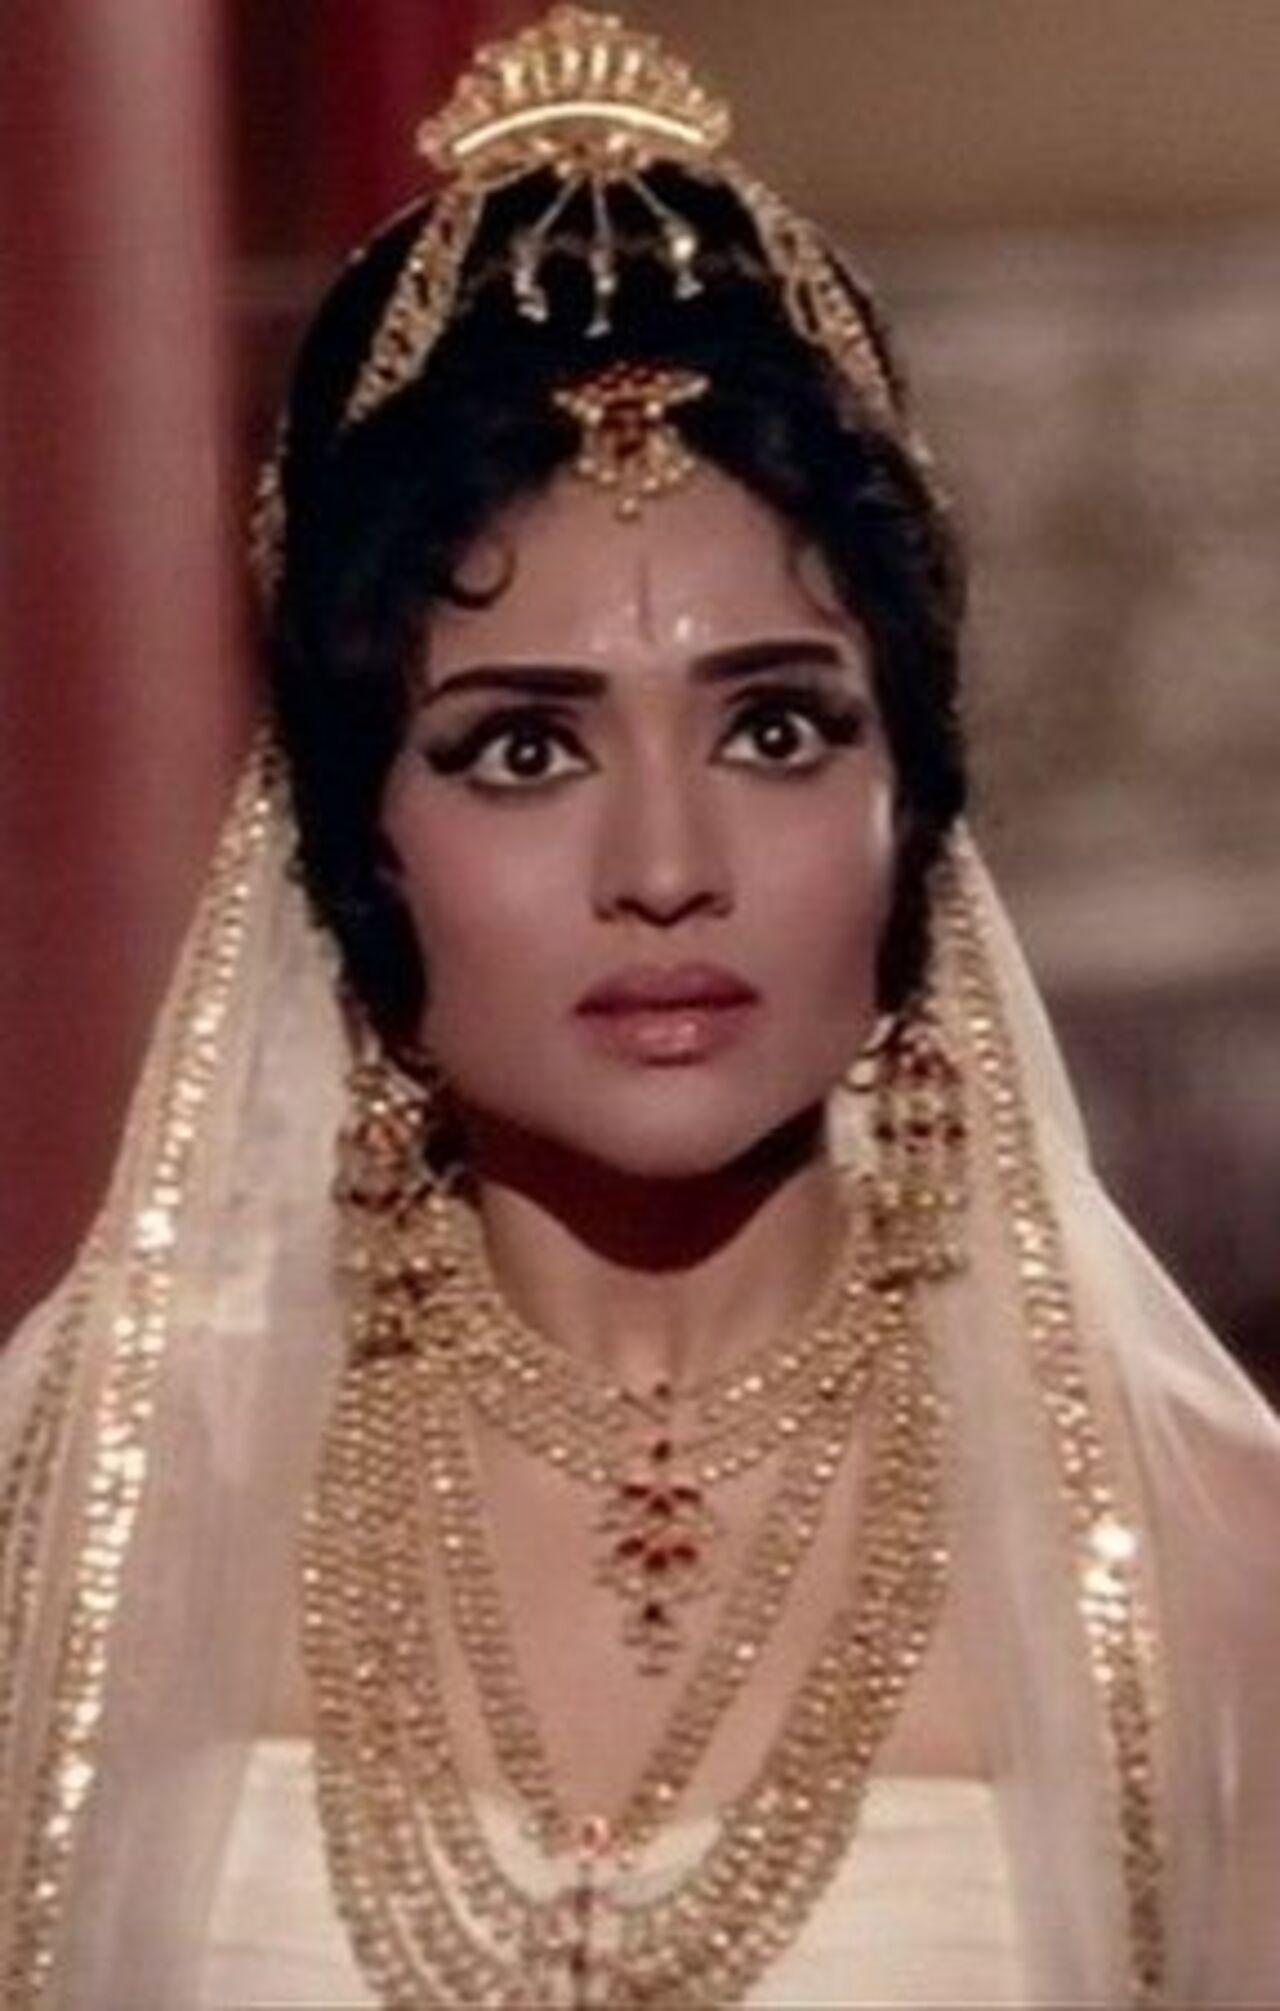 These enormous wigs were made out of real hair and even '70s heroine is notorious of sporting a fake hairpiece in at least one of their films. Whether it was dancing sensation Helen or beauties like Vyjyanthimala, Hema Malini and Babita, every icon embraced this trend with much pomp